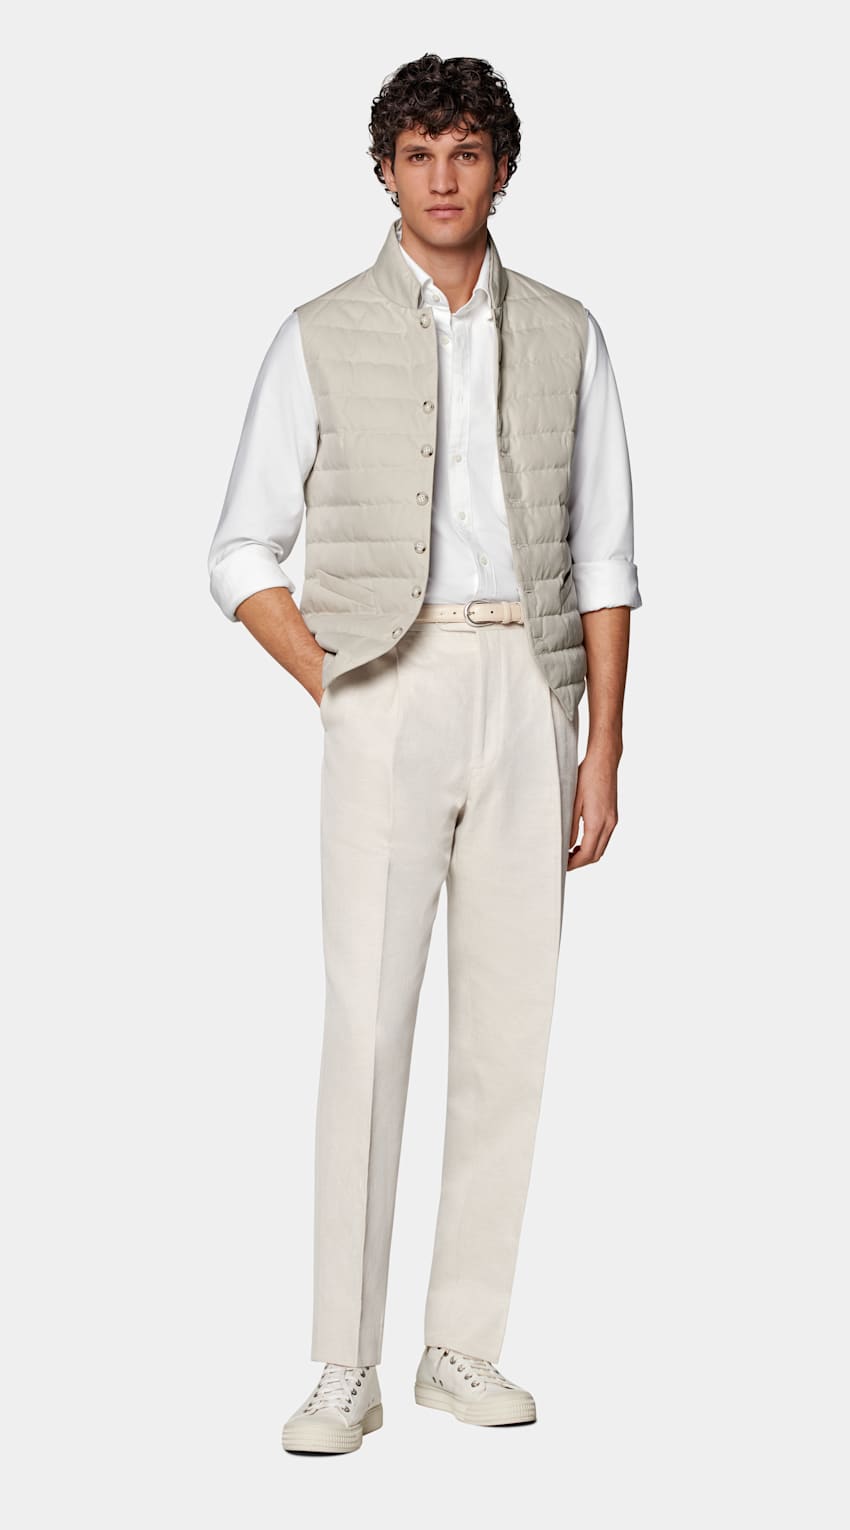 SUITSUPPLY Pure Cotton by Olmetex, Italy Sand Down Down Vest